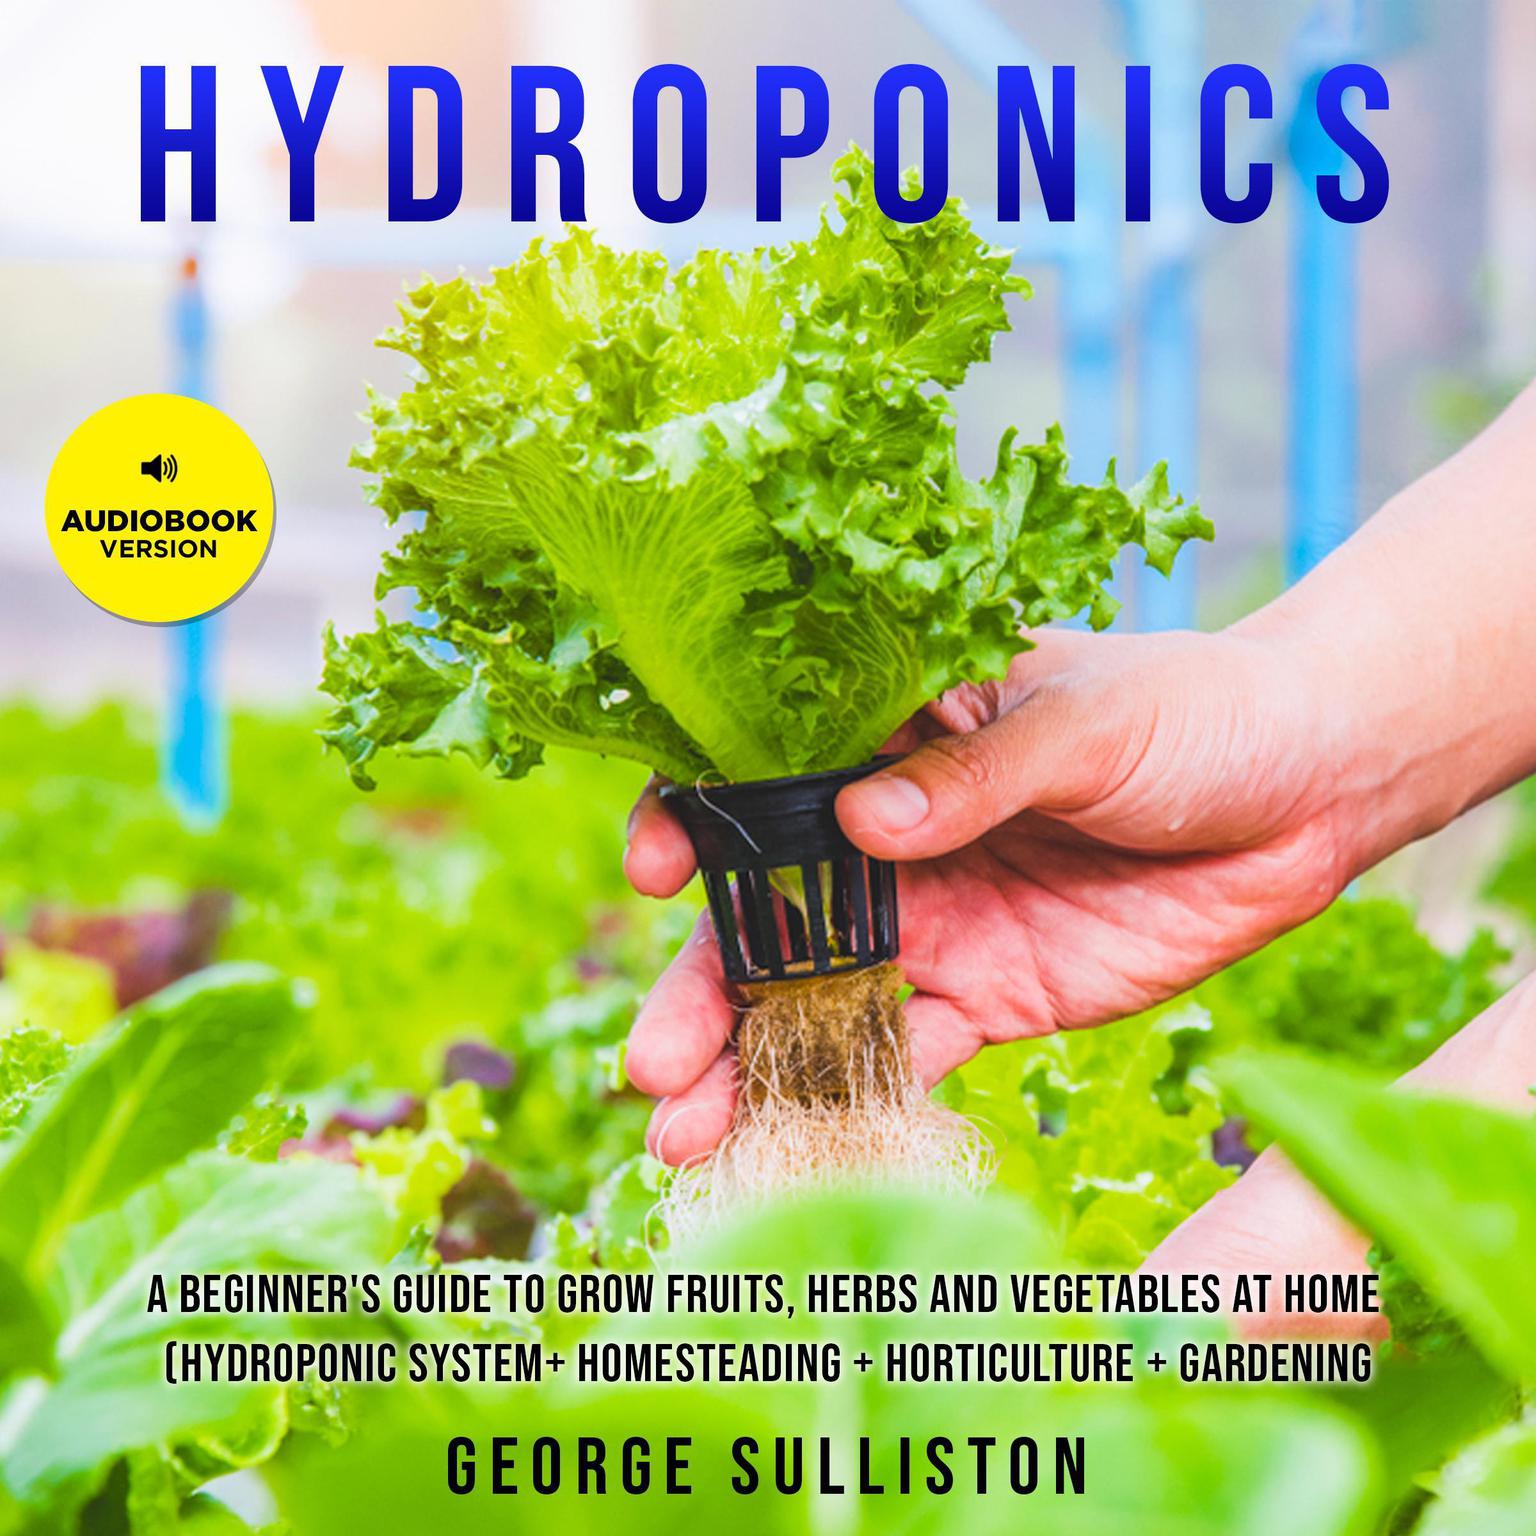 Hydroponics: A Beginners Guide to Grow Fruits, Herbs and Vegetables at Home (Hydroponic System+ Homesteading + Horticulture + Gardening) Audiobook, by George Sulliston